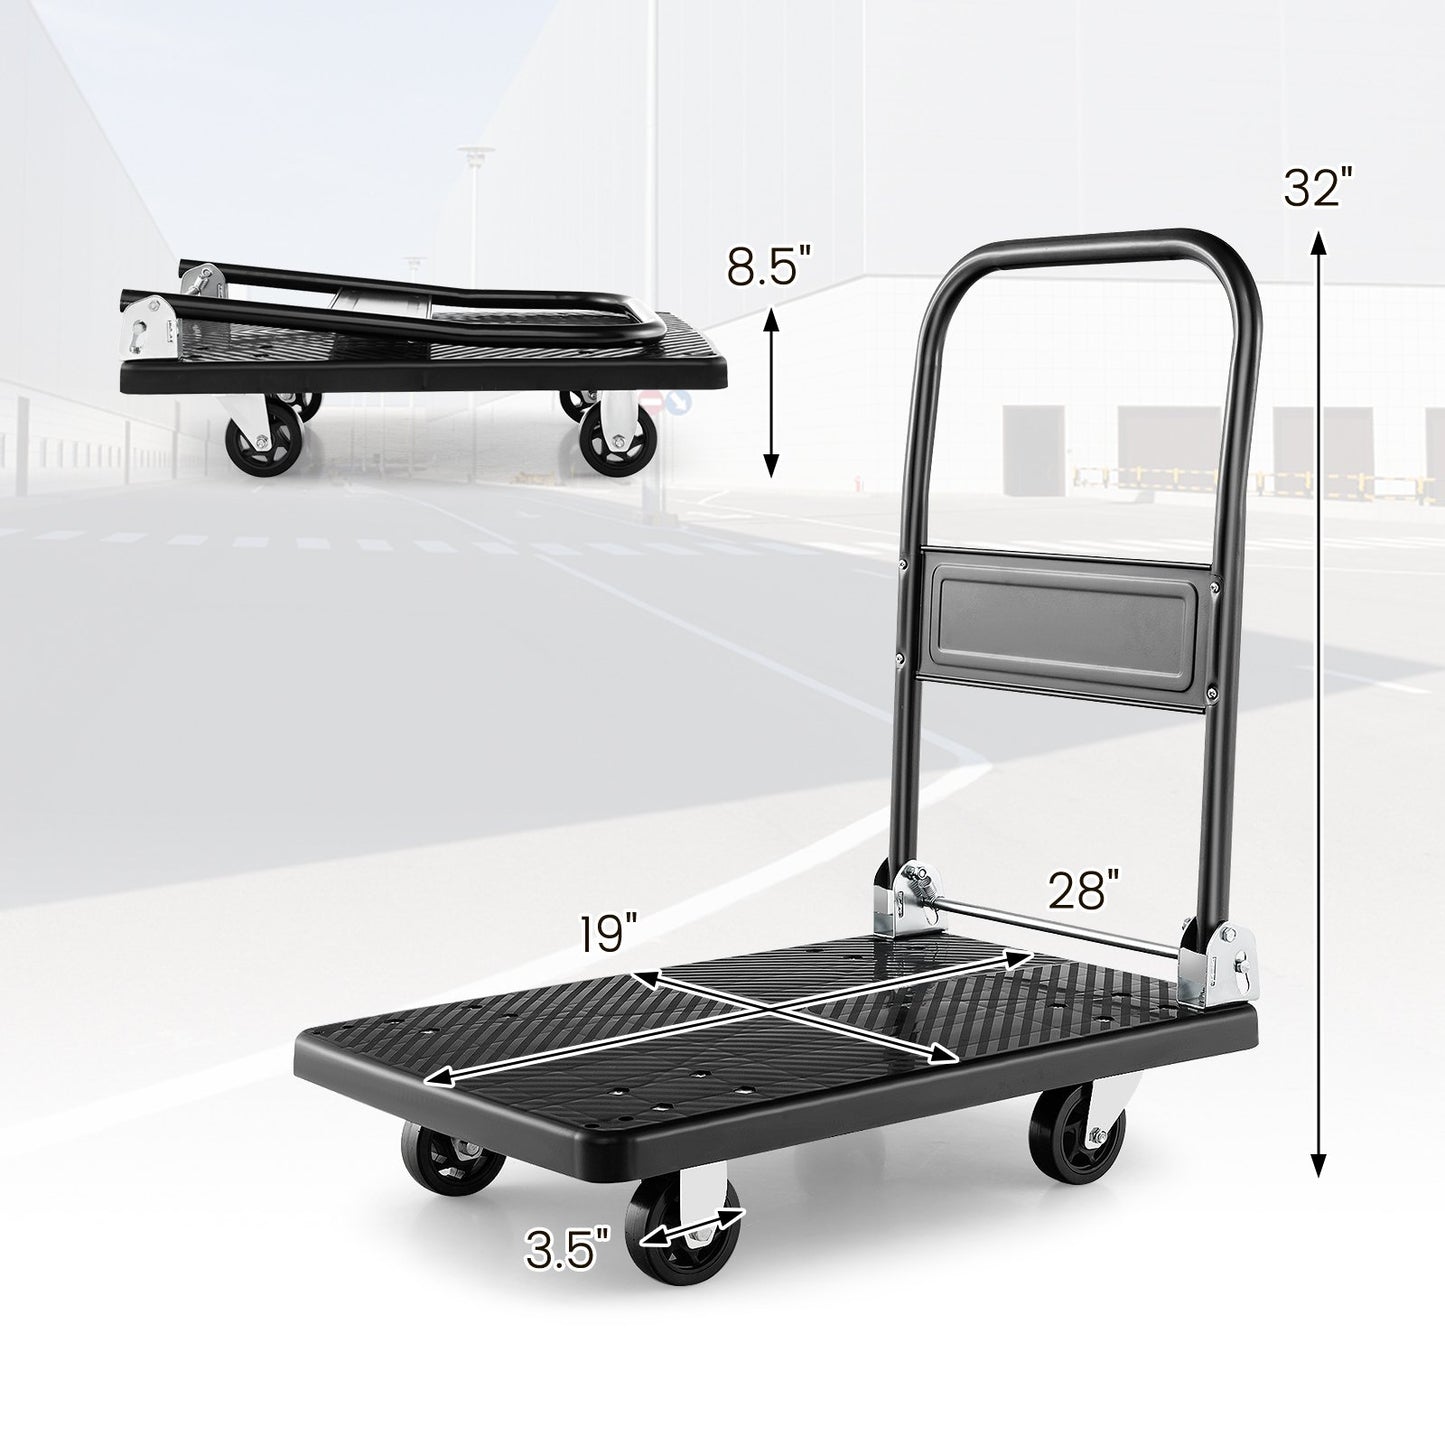 Folding Push Cart Dolly with Swivel Wheels and Non-Slip Loading Area-36 x 24 inches, Black